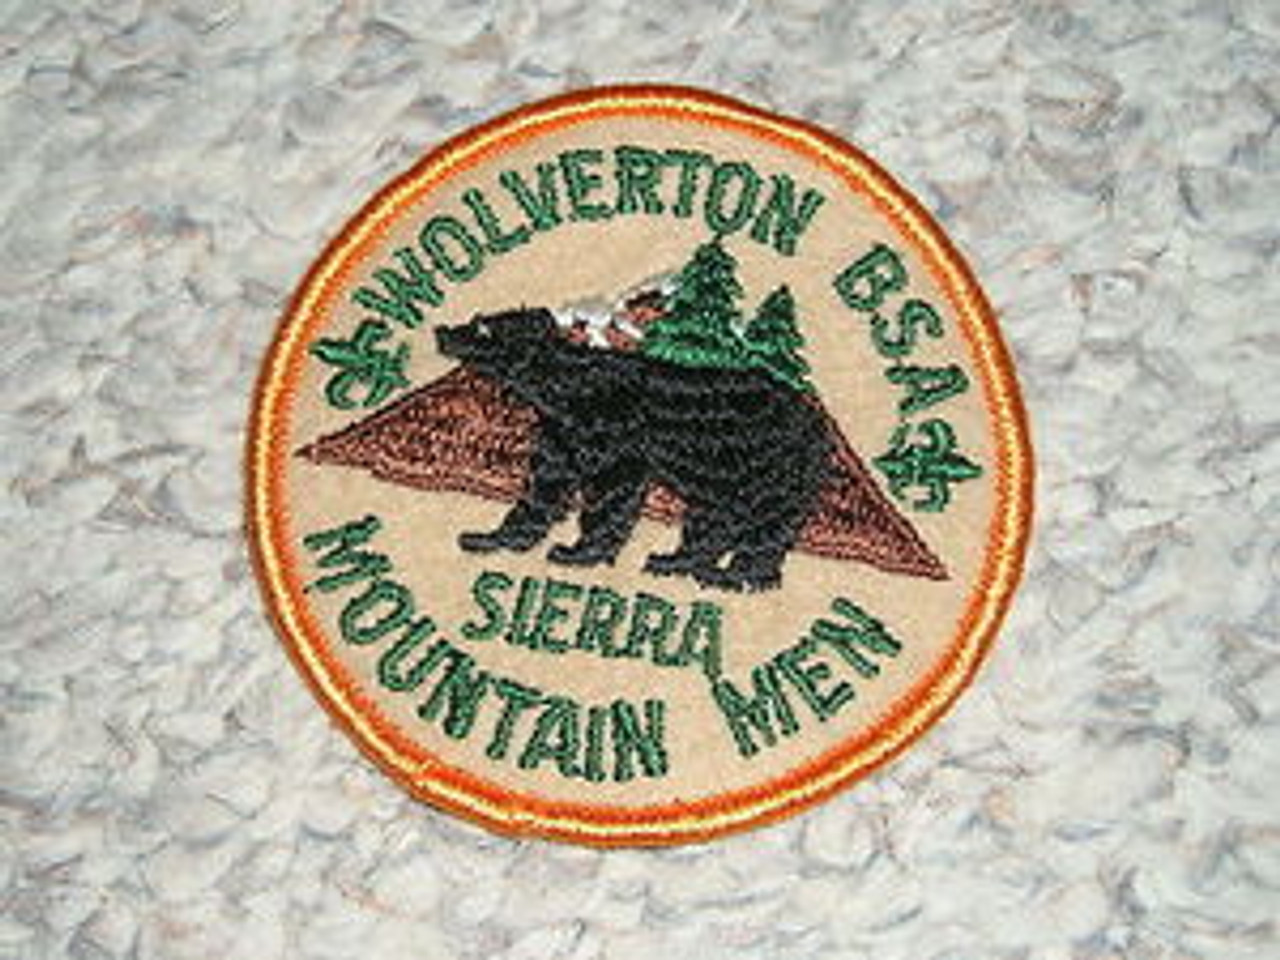 1980's Camp Wolverton Patch - Southern California Scouting